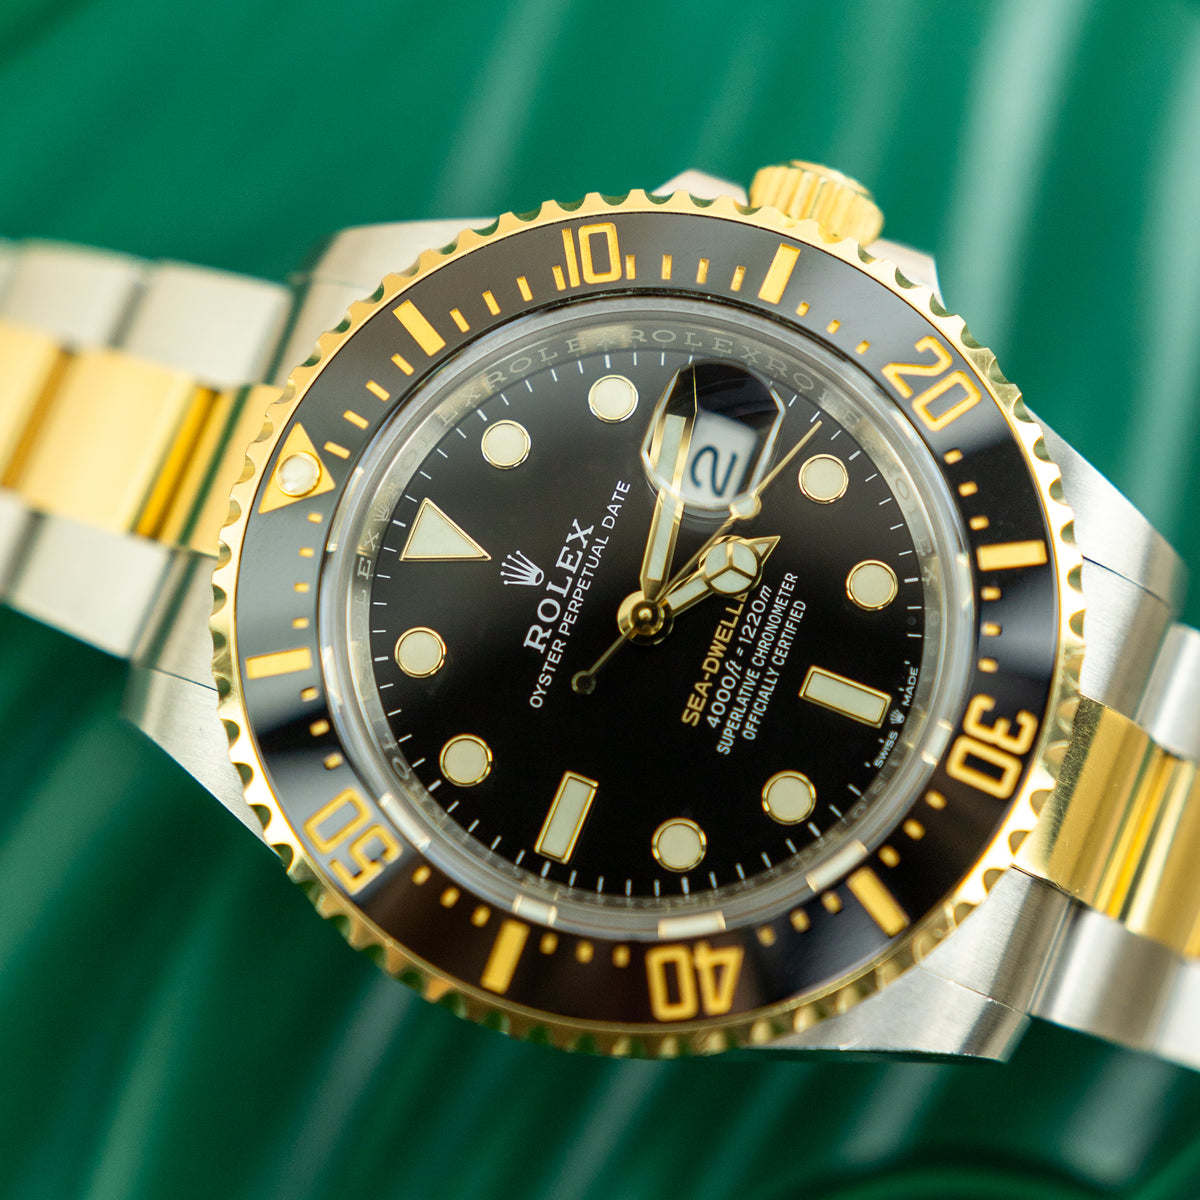 2020 Rolex SEA-DWELLER  Bi Metal Oystersteel & 18K Yellow Gold, 43mm 126603 available at RR Jewellers Yarm